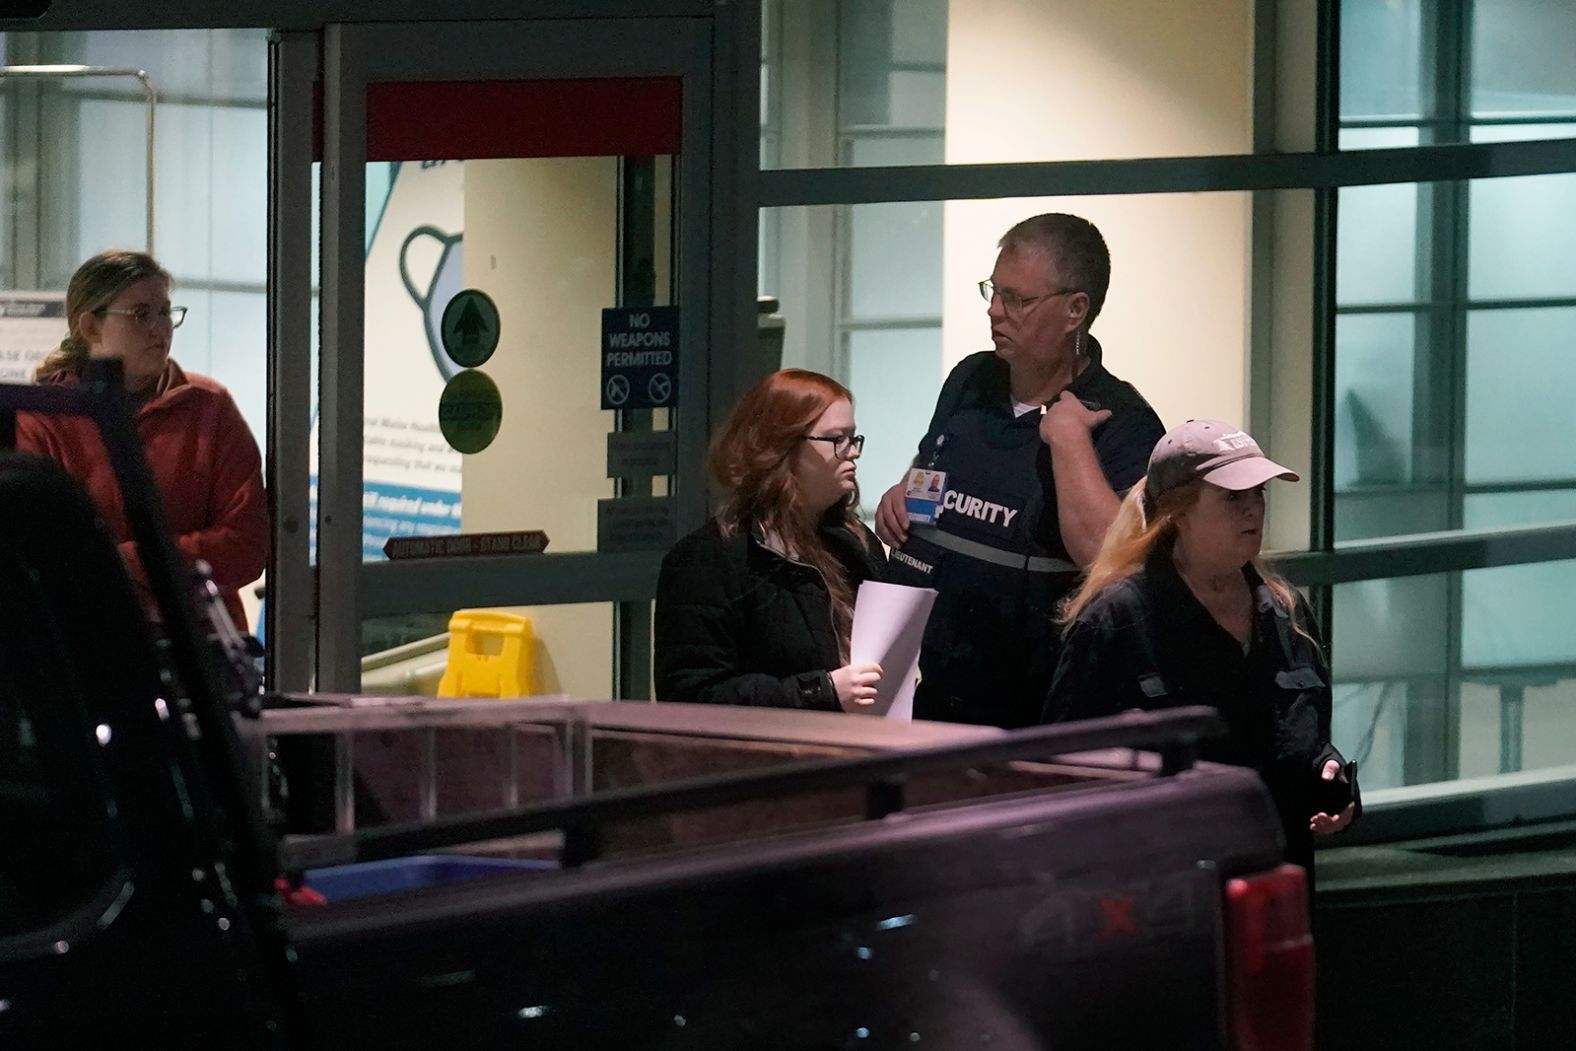 People depart an emergency room entrance at the Central Maine Medical Center.